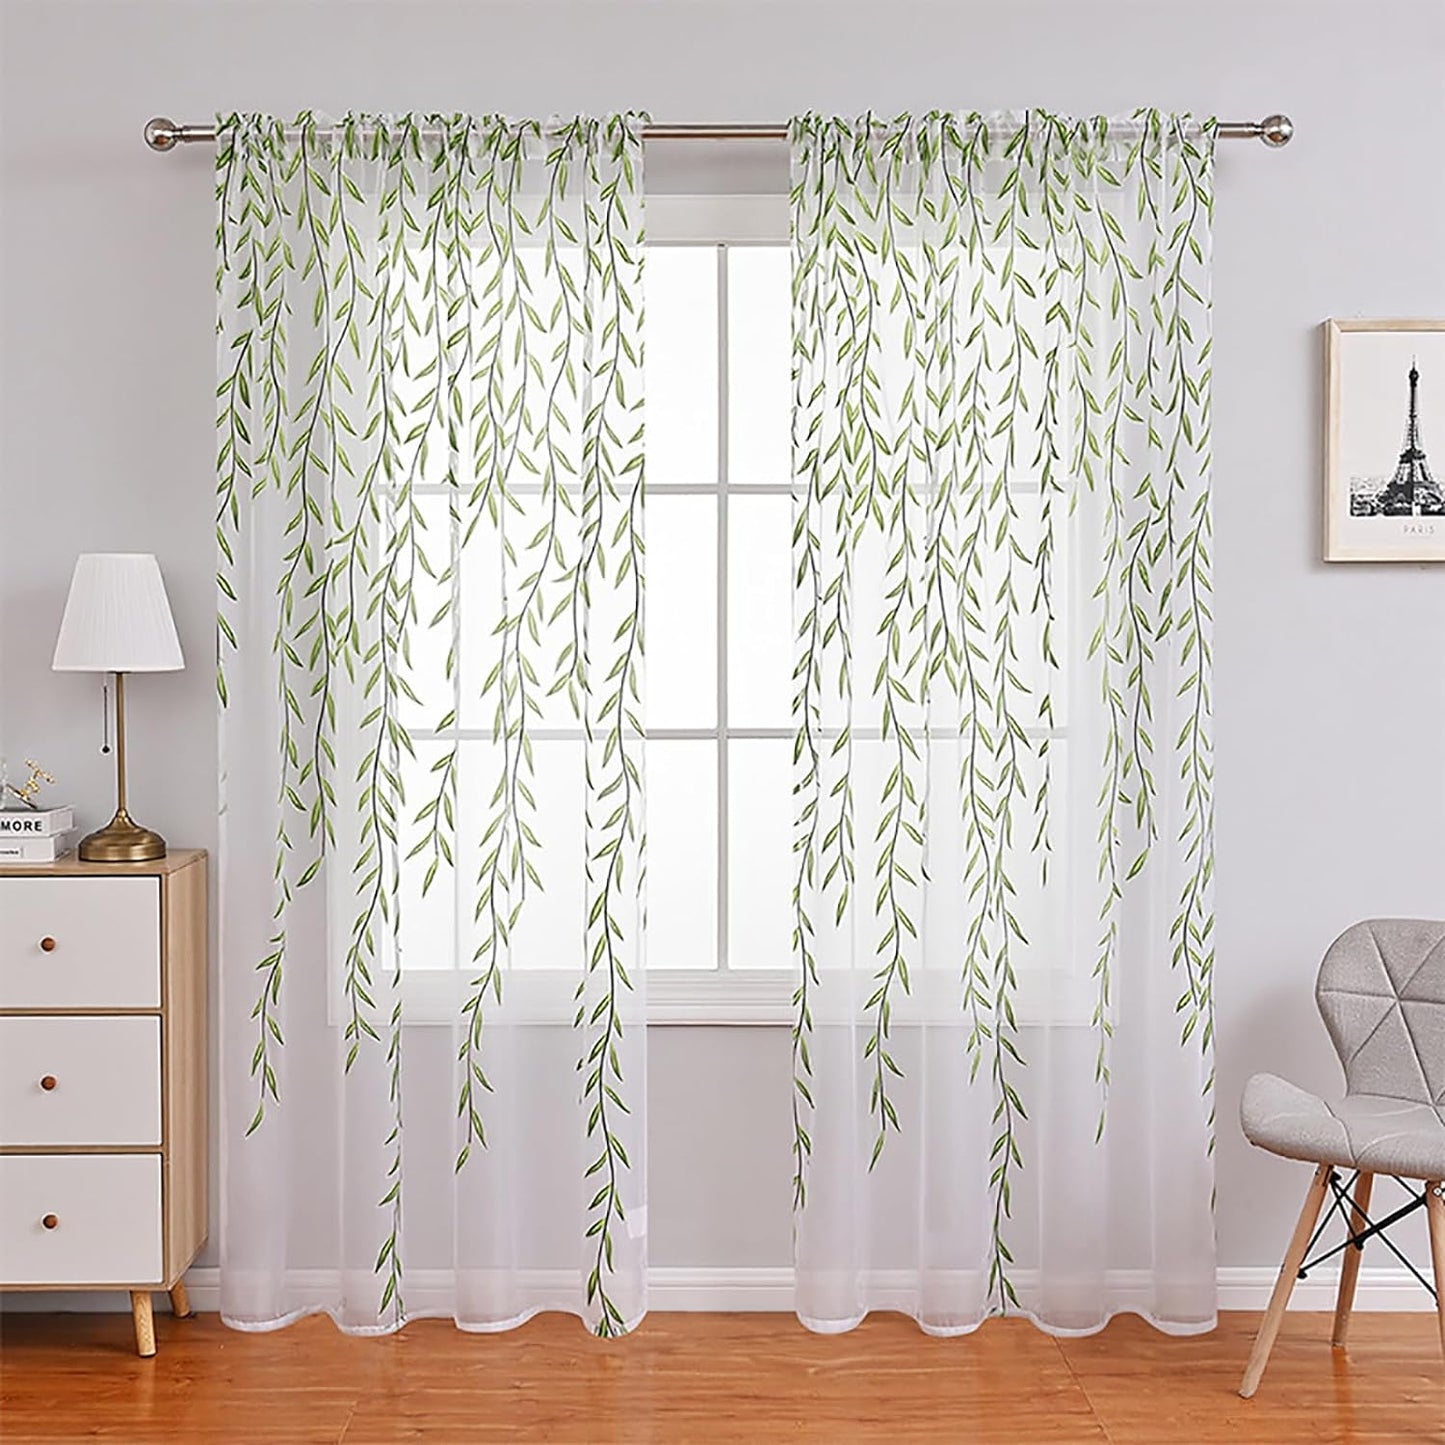 Ufurty Rely2016 Sunflower Window Curtain, 2PCS Sun Flower Floral Voile Sheer Curtain Panels Tulle Room Salix Leaf Sheer Gauze Curtain for Living Room, Bedroom, Balcony - Rod Pocket Top (100 X 200)  Rely2016 Green Leaf 100*200Cm 